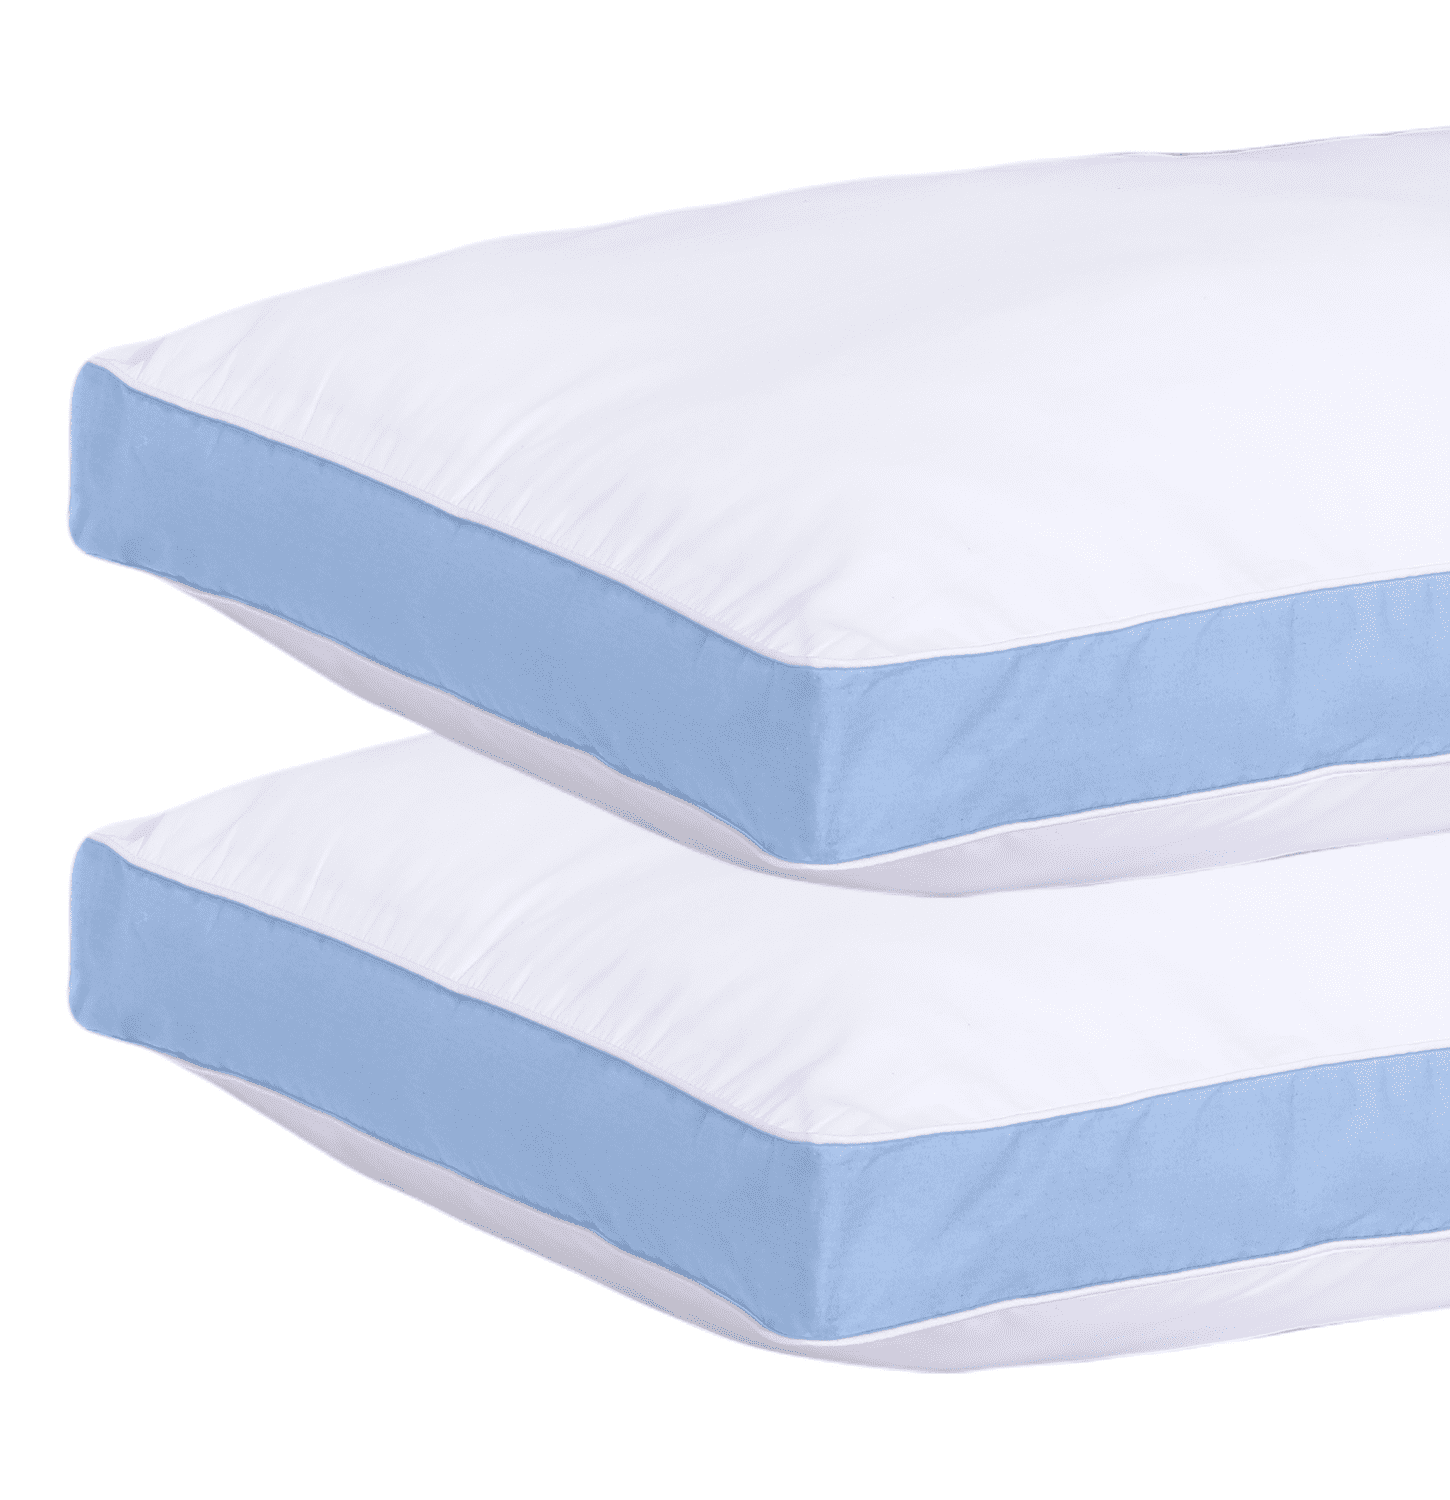 Utopia Bedding Queen Size Bed Pillows 2PK and 2PK Gusset Bed Pillow (White)